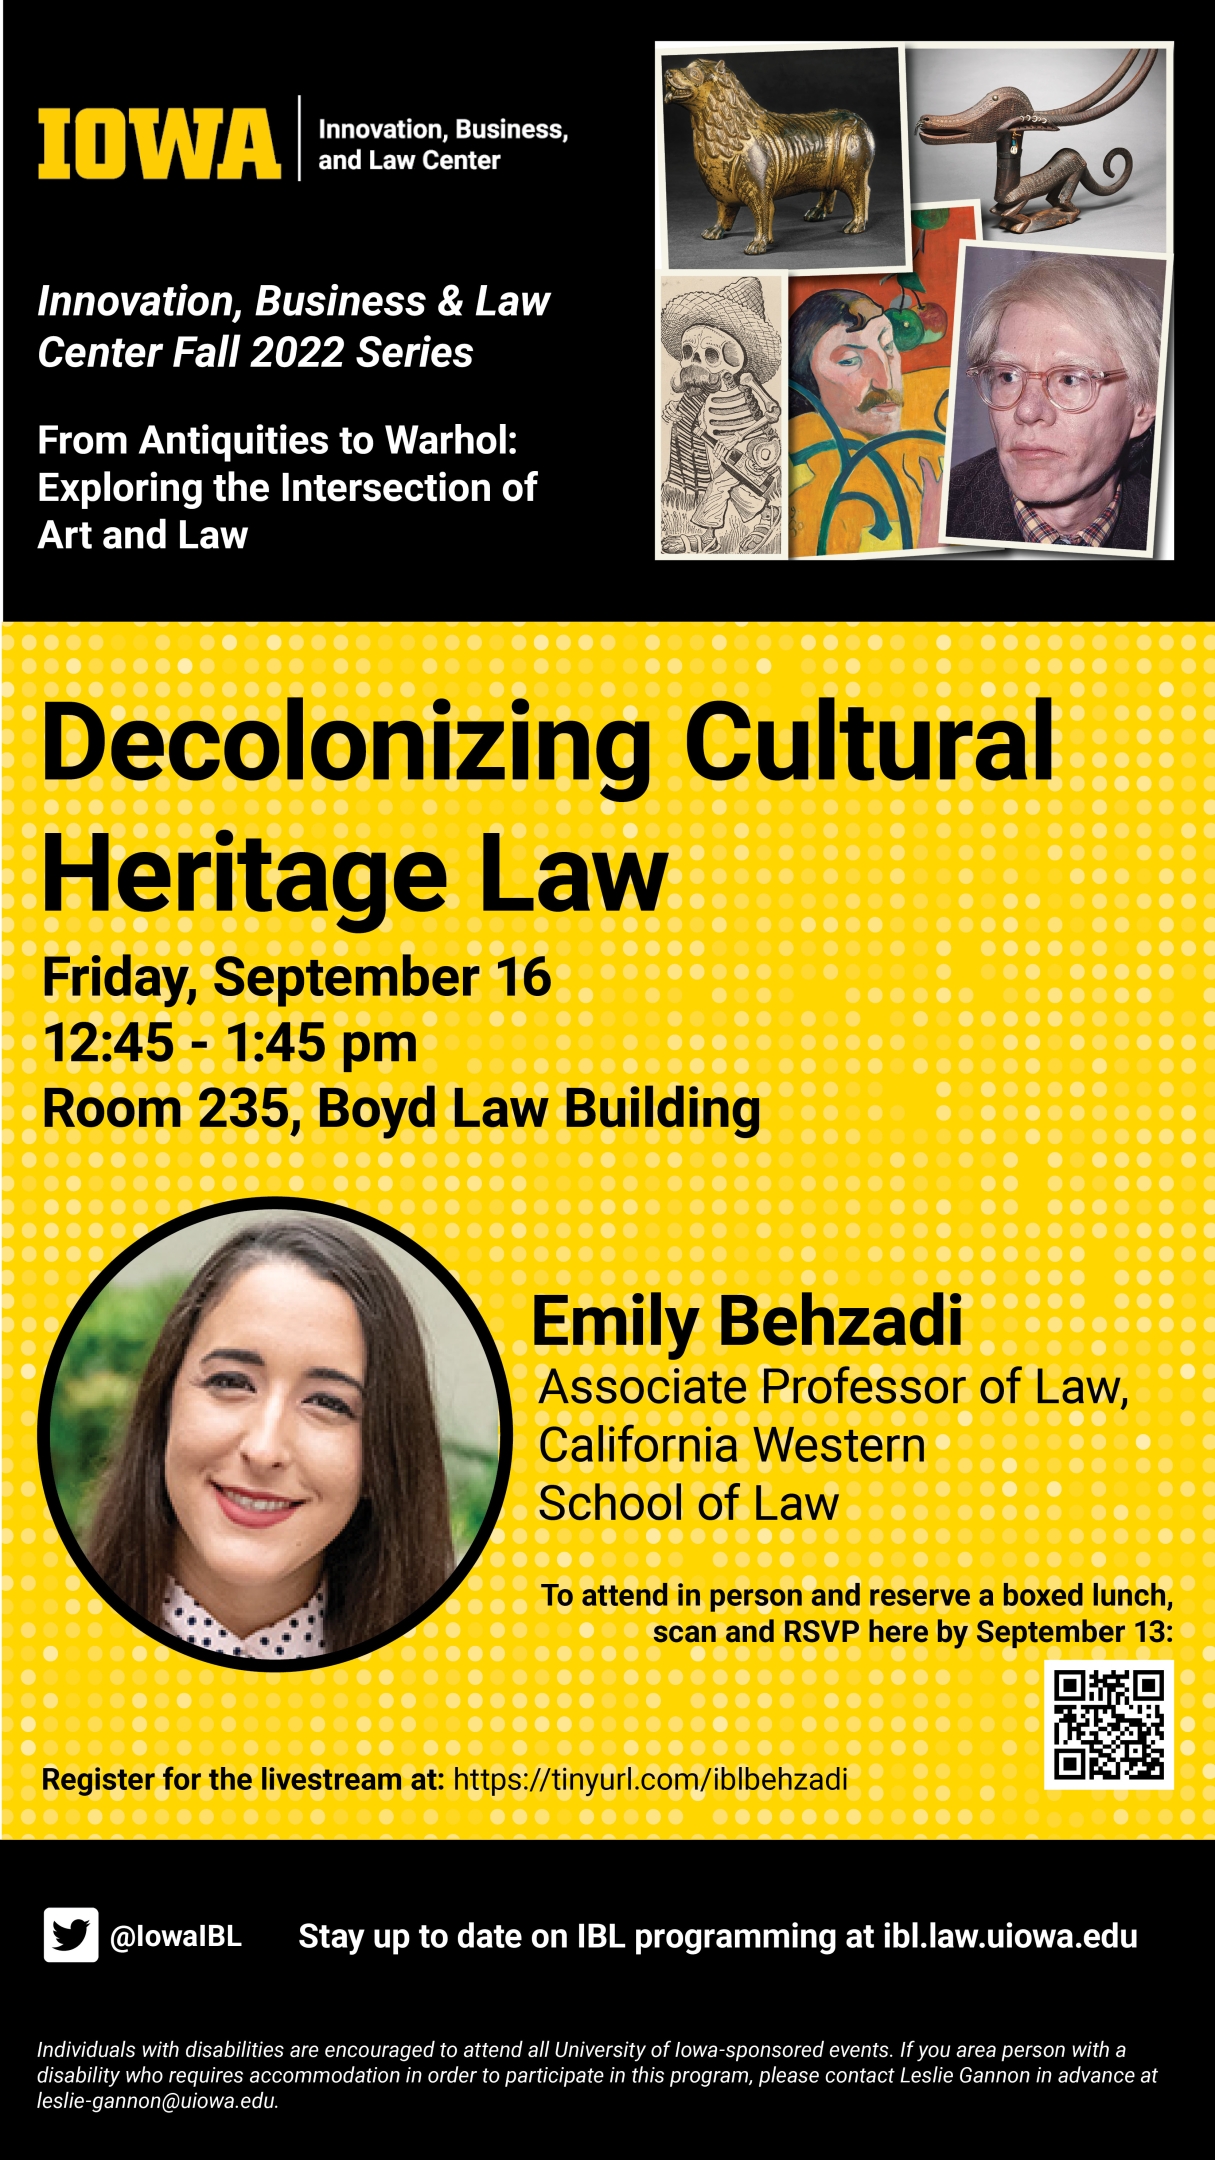 "Decolonizing Cultural Heritage Law"